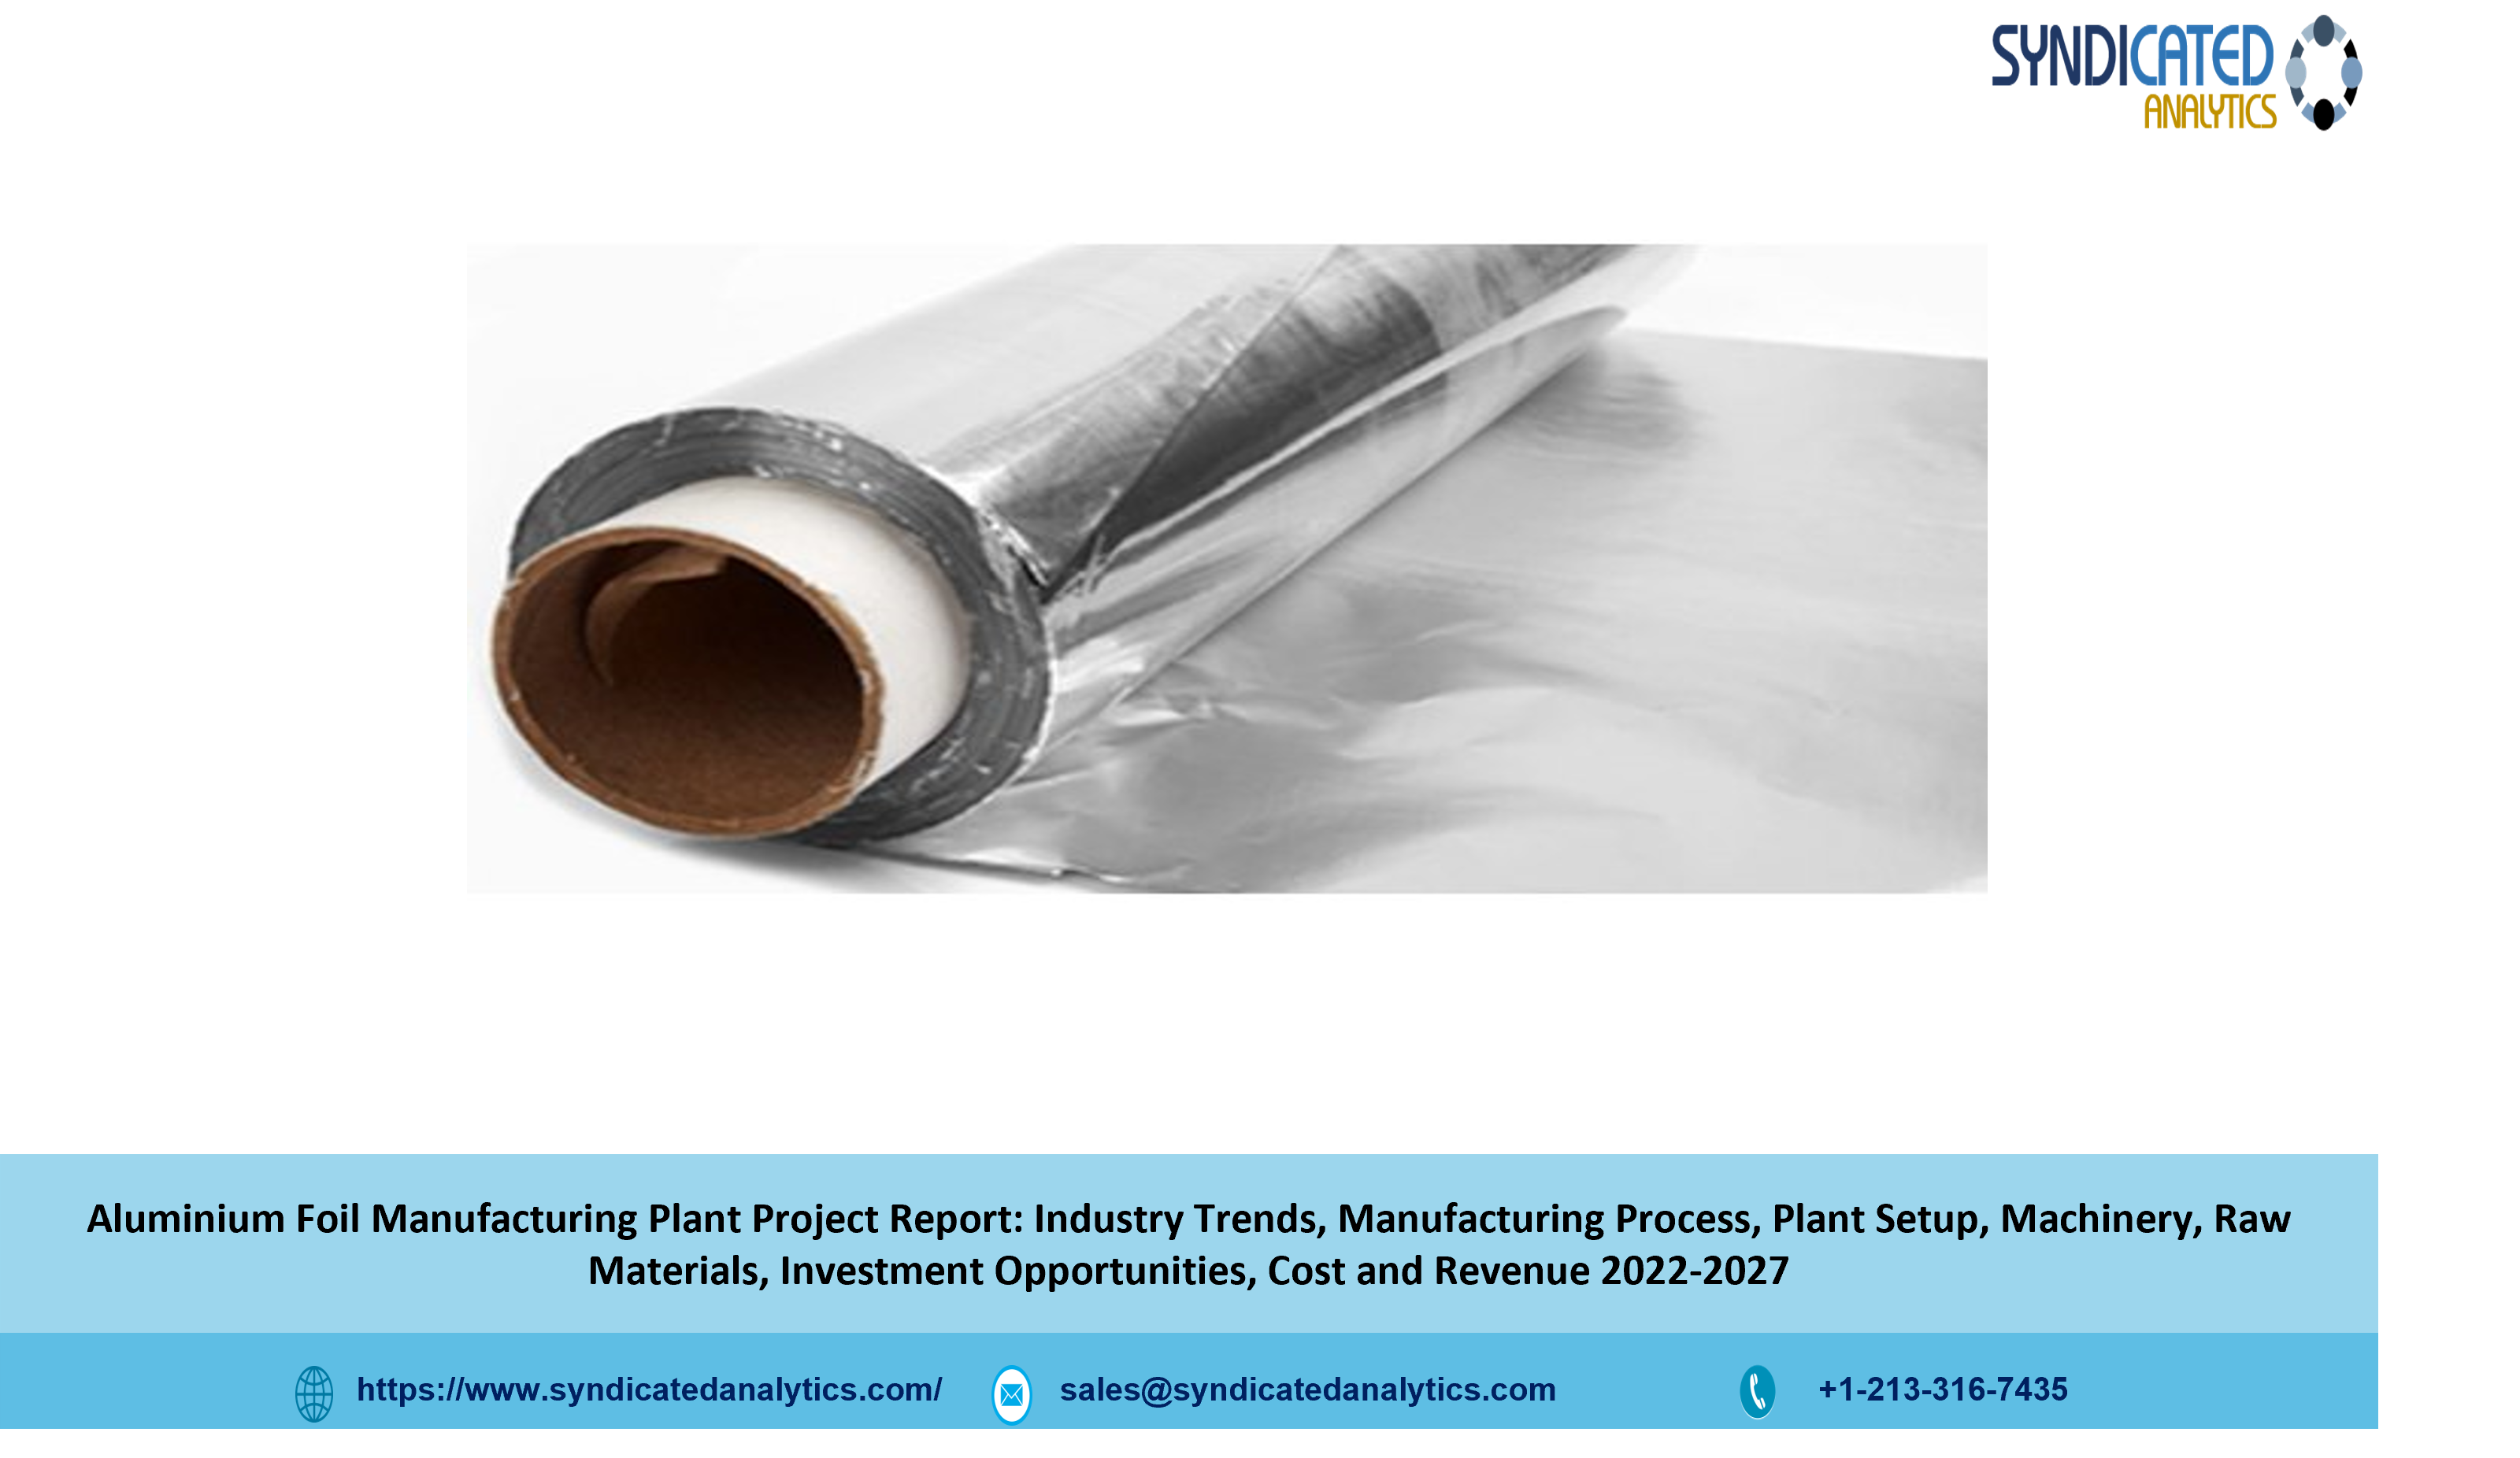 Aluminium Foil Manufacturing Plant Cost 2022-2027: Project Report, Plant Setup, Business Plan, Industry Trends, Raw Materials, Cost and Revenue - Syndicated Analytics